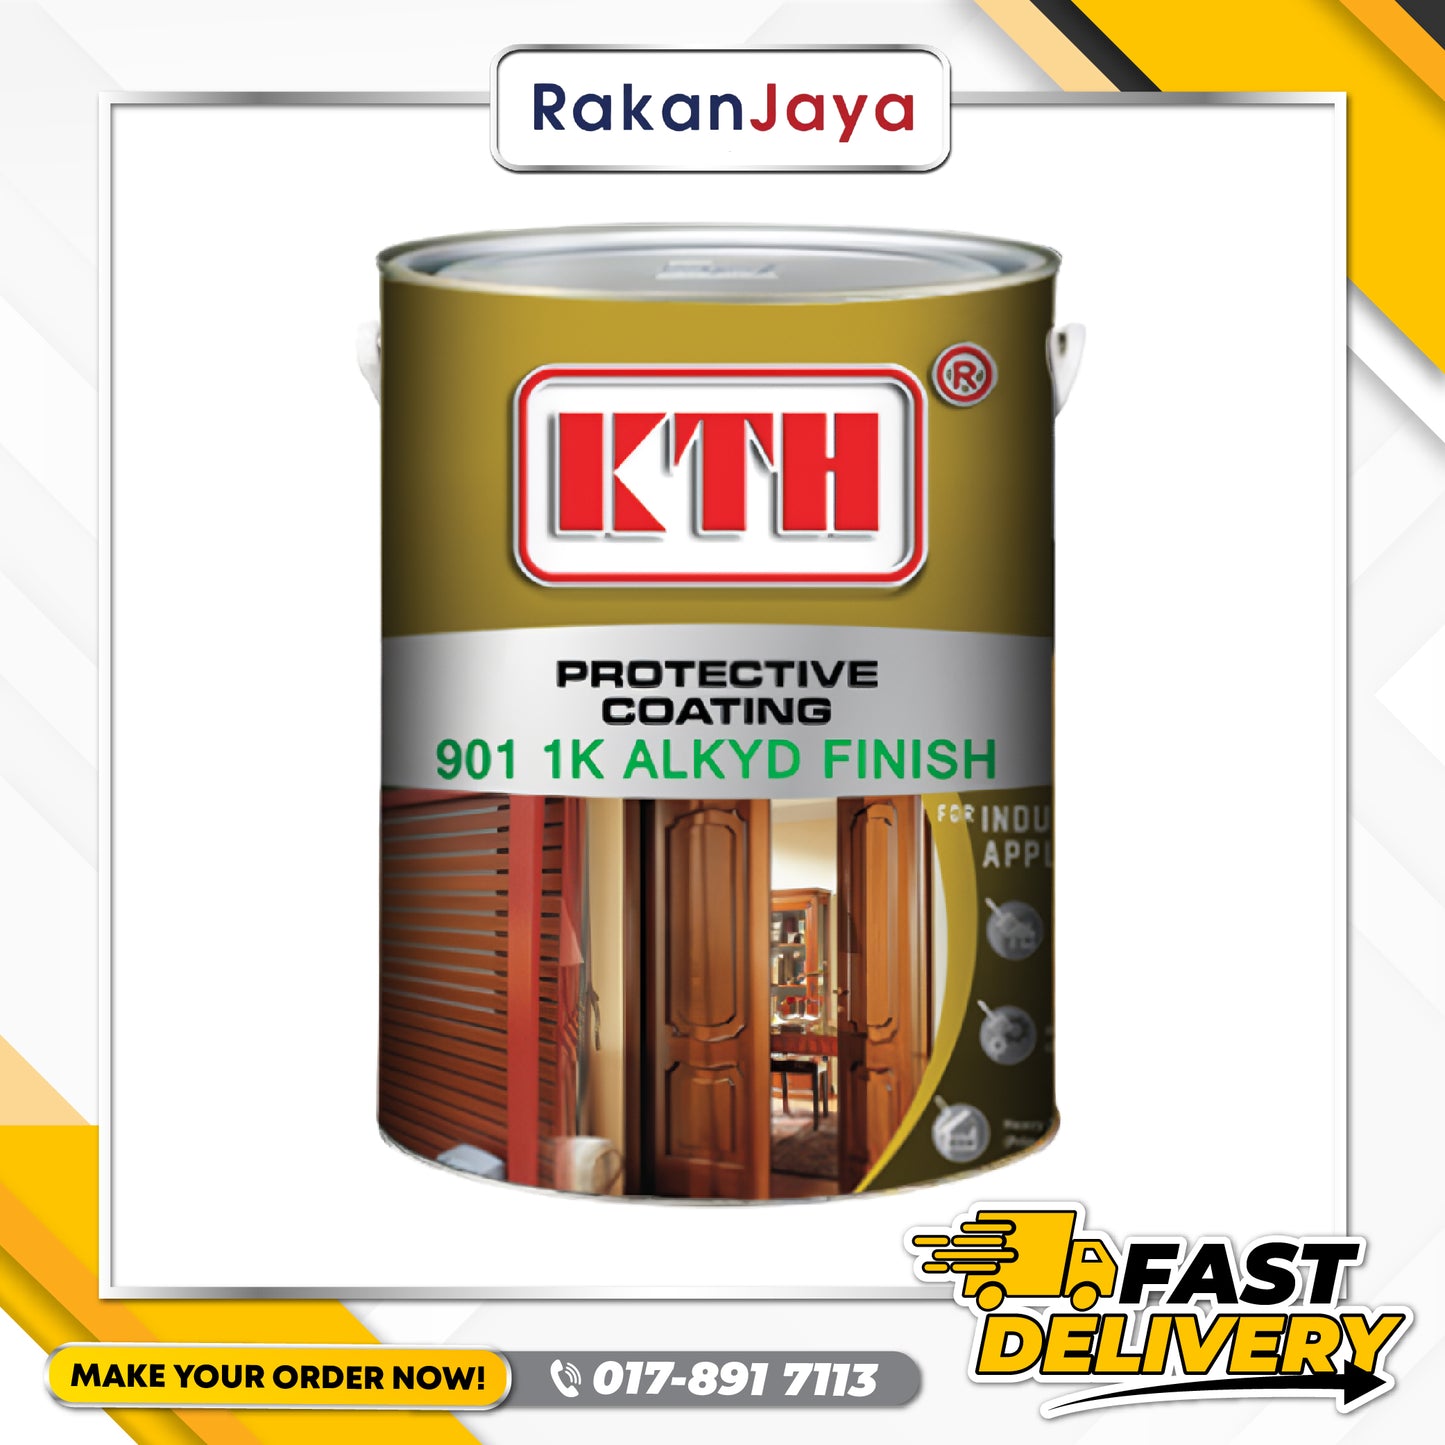 KTH PROTECTIVE COATING ALKYD FINISH 901 1K